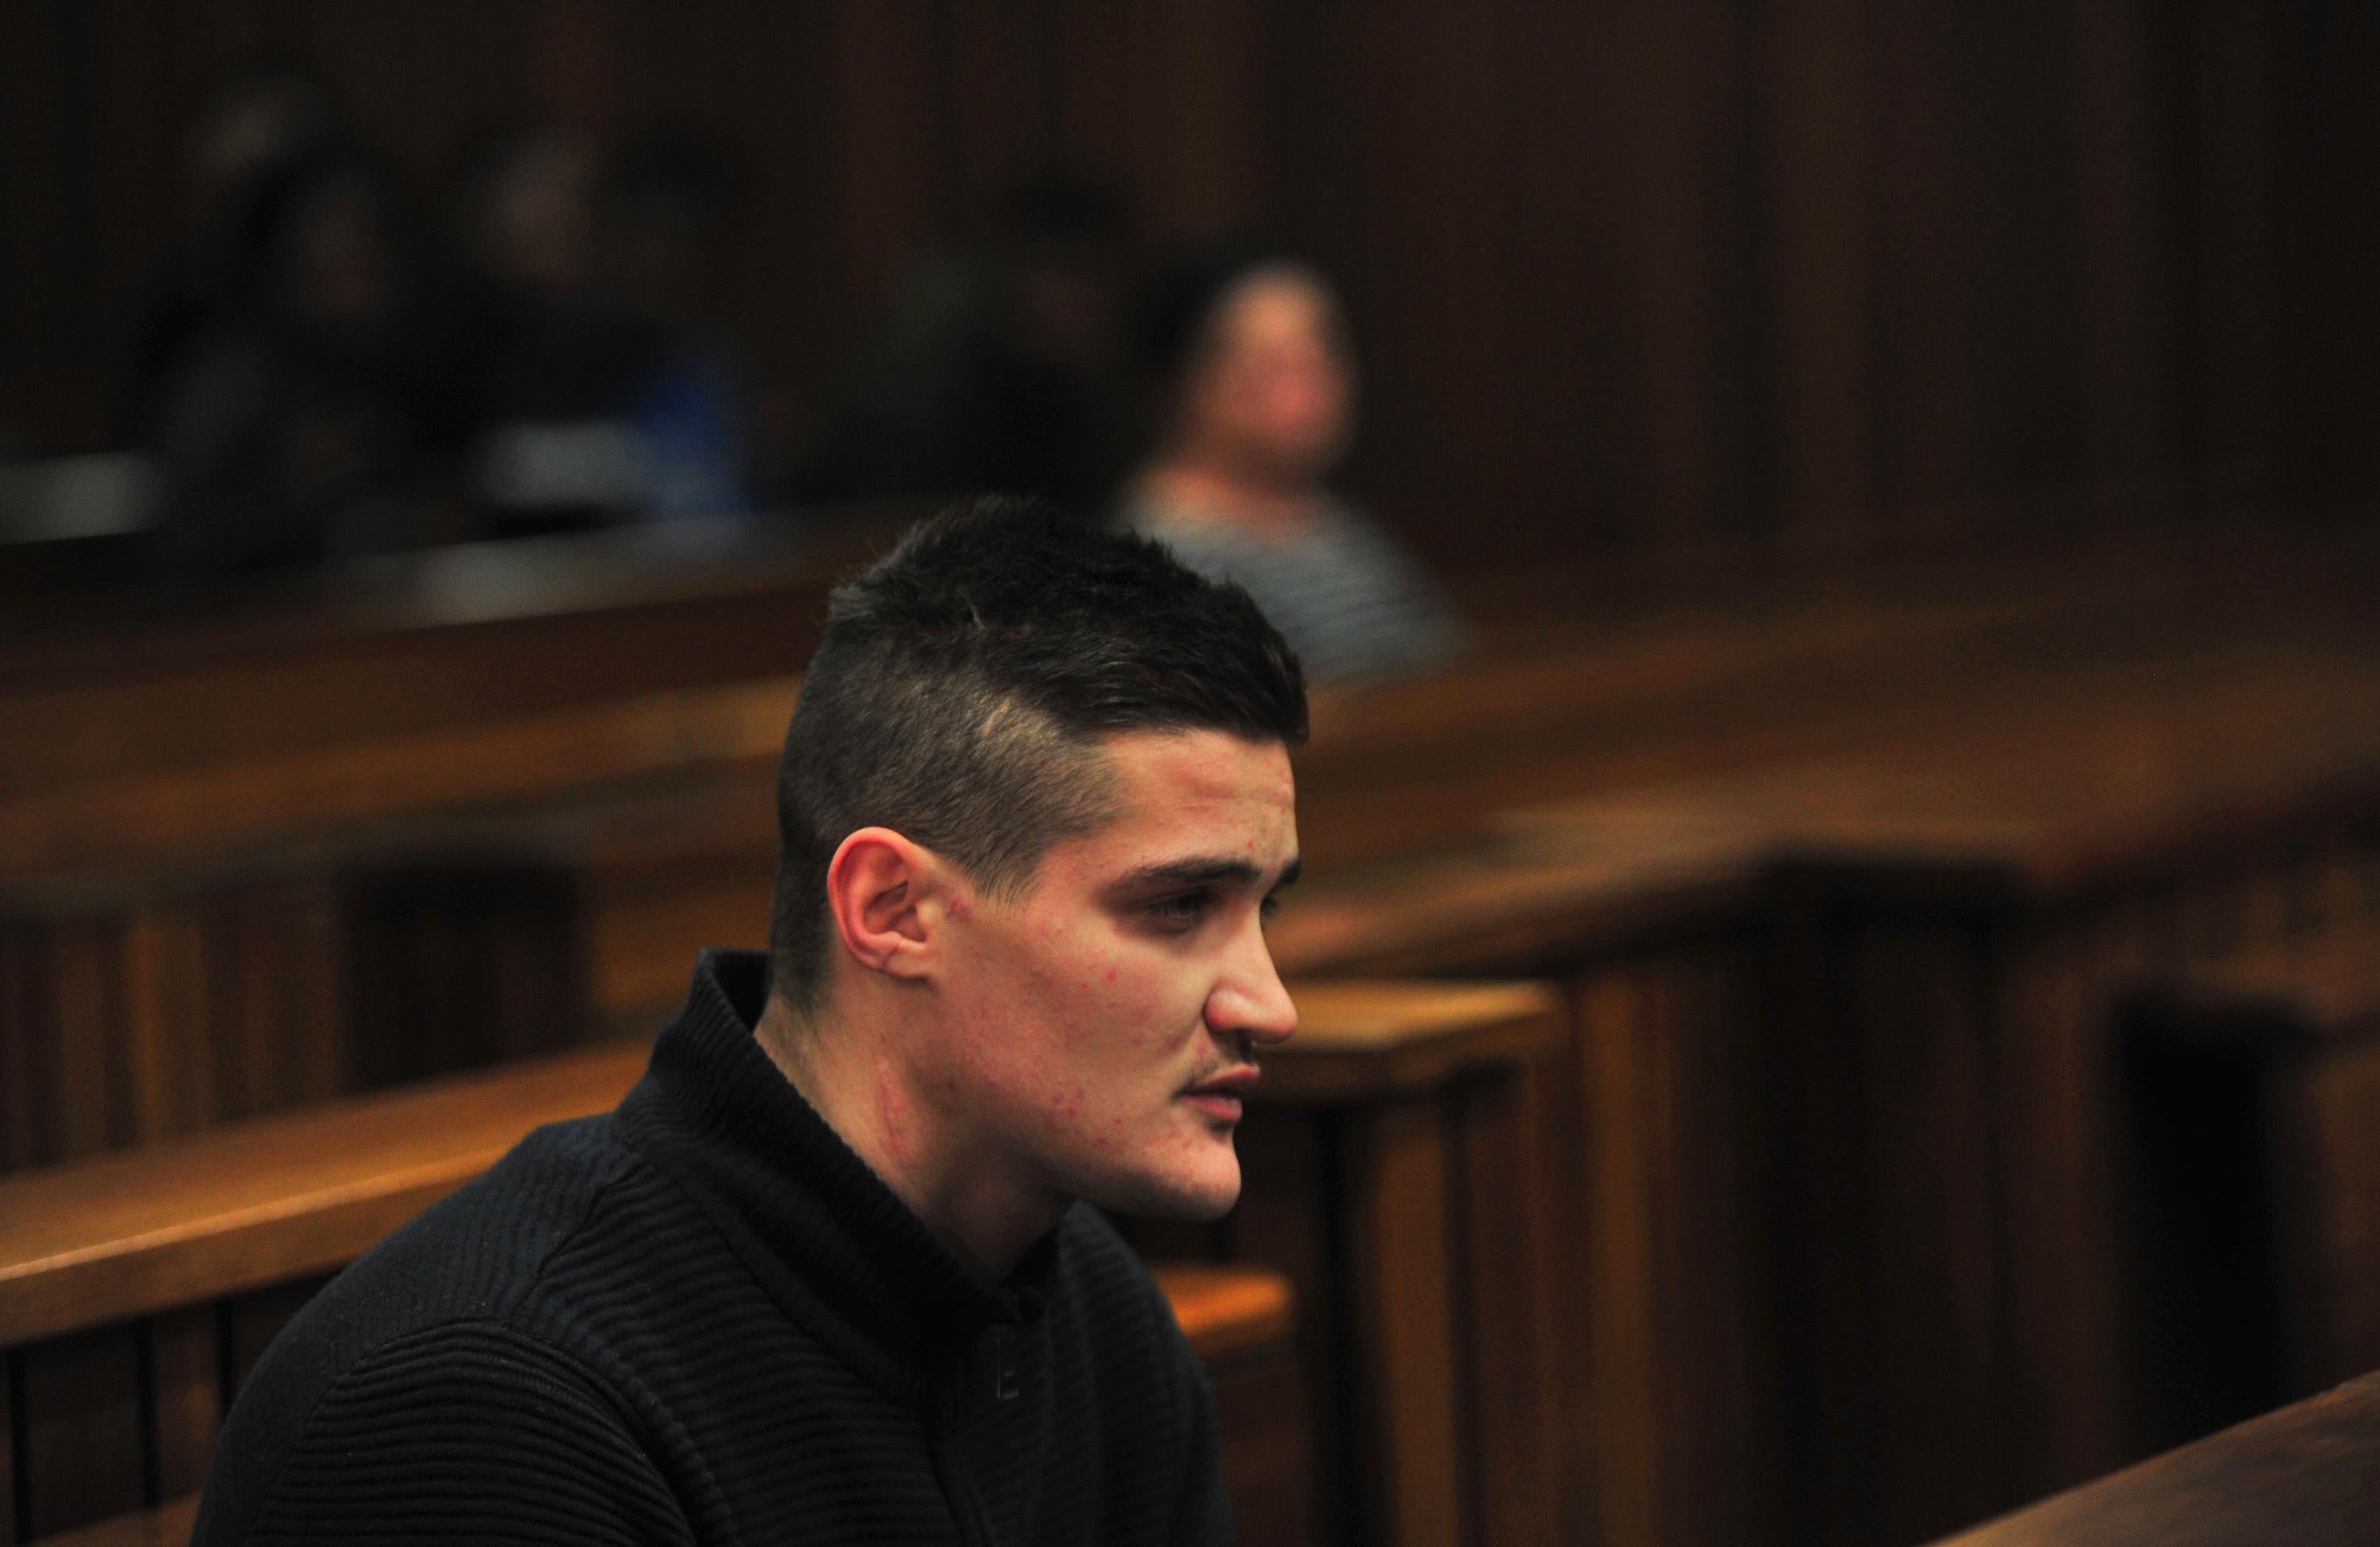 Dros 'rapist' Case: South African man, who raped a 7-year-old girl found guilty of two charges of rape